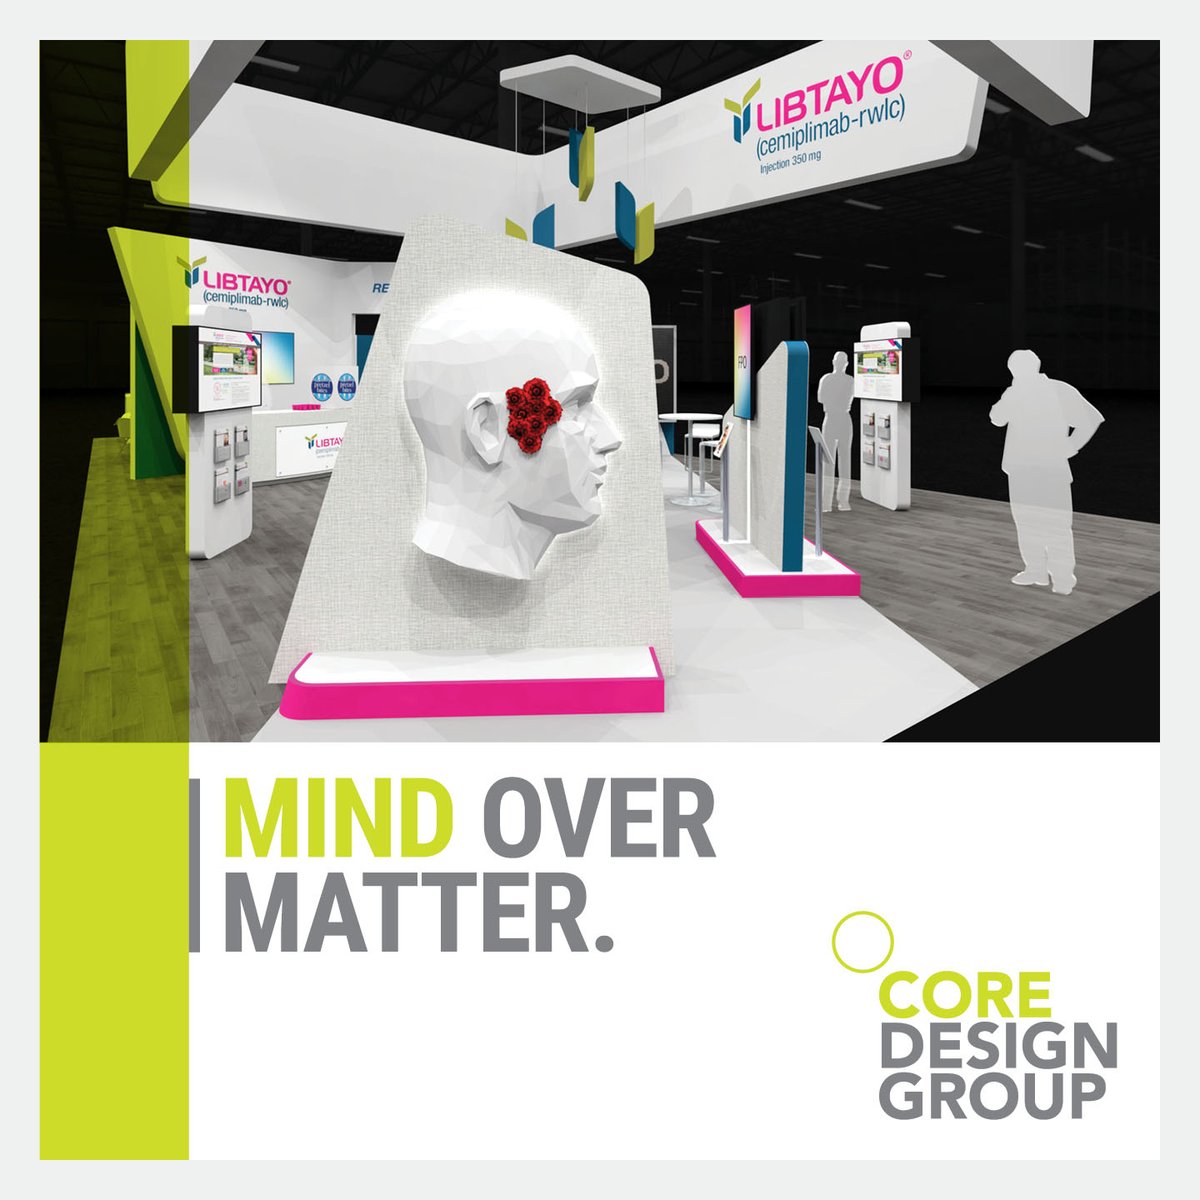 #tradeshow design is what we specialize in. Contact us for a quote: coredesigngroup.net/contact/